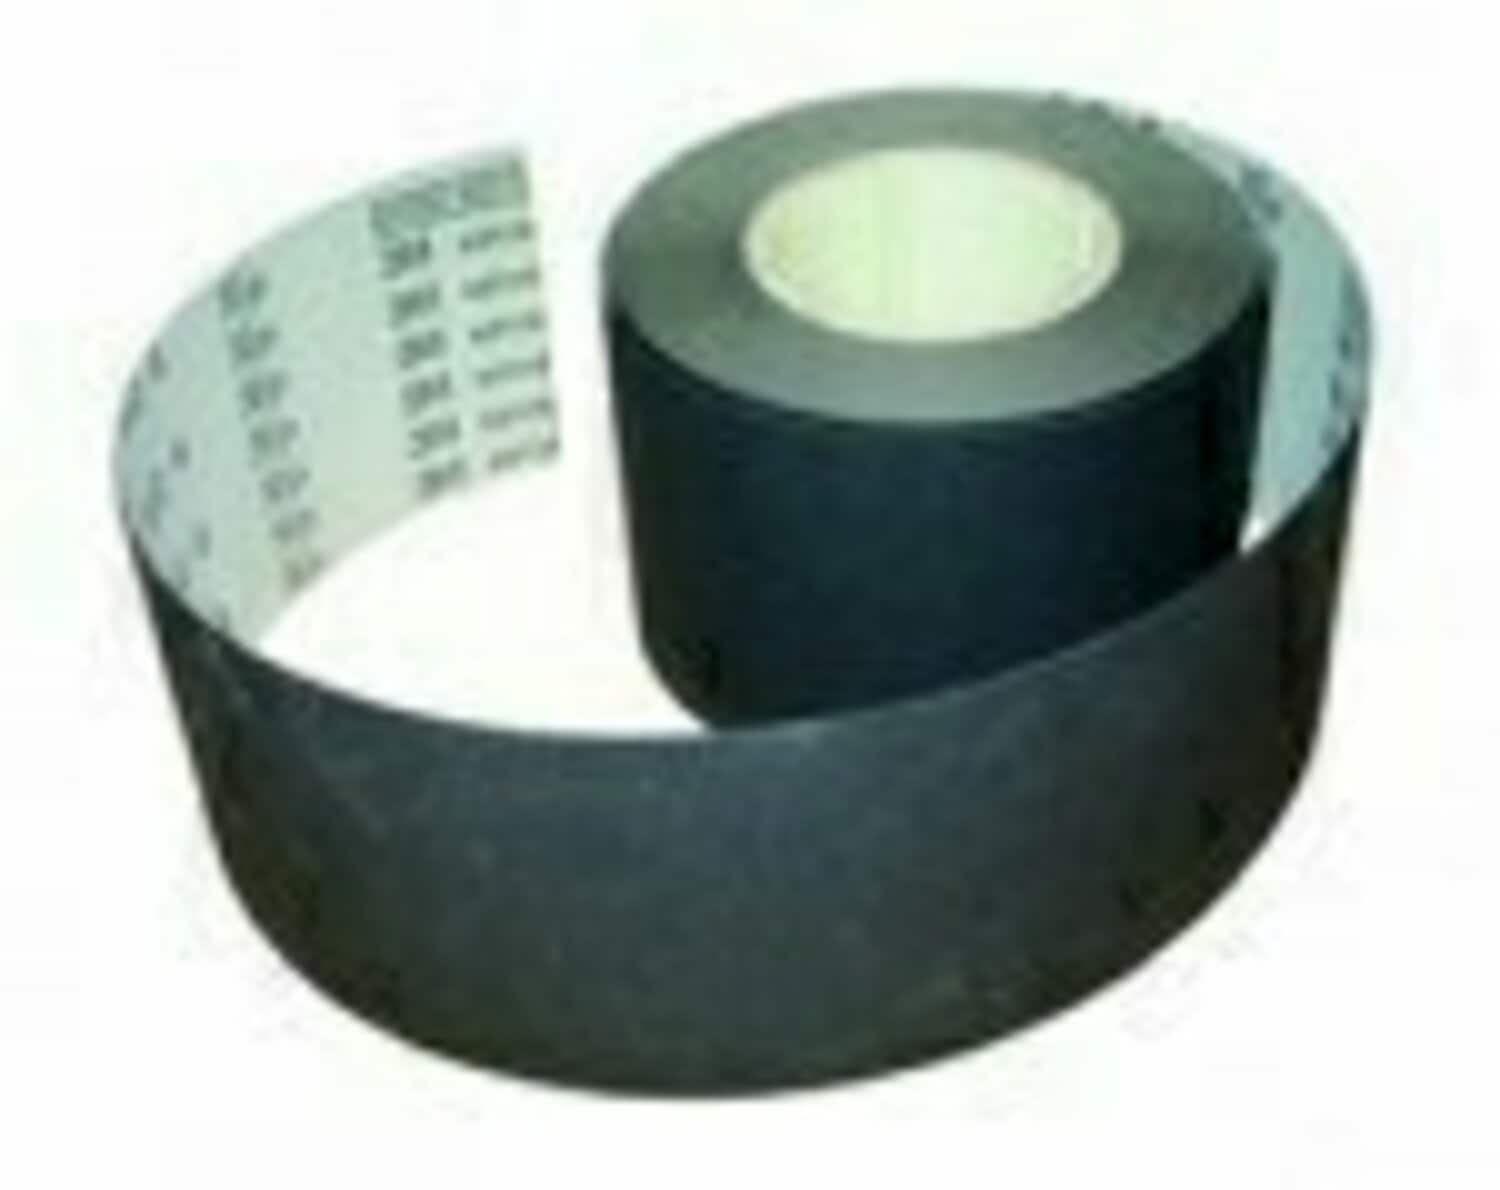 7010509958 - 3M Microfinishing Film Roll 472L, 30 Mic 5MIL, Type E, 8 in x 150 ft x
3 in (203.2mmx45.75m), Keyed Core, ASO